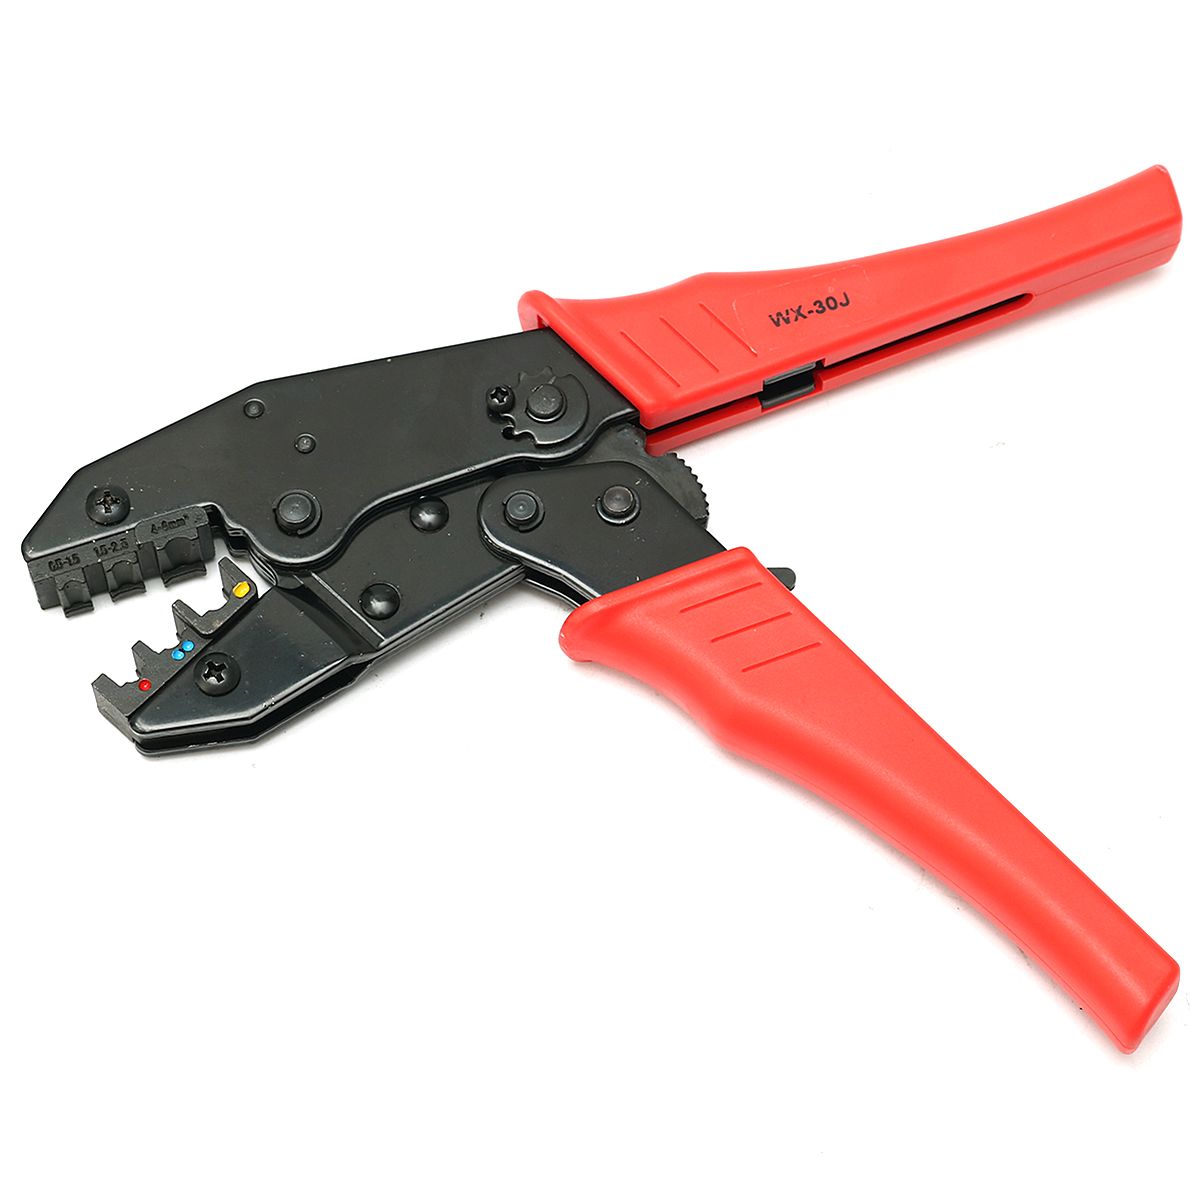 05-6mmsup2-Heavy-Duty-Ratchet-Crimping-Plier-Wire-Cable-Crimper-Electricians-Tool-1195956